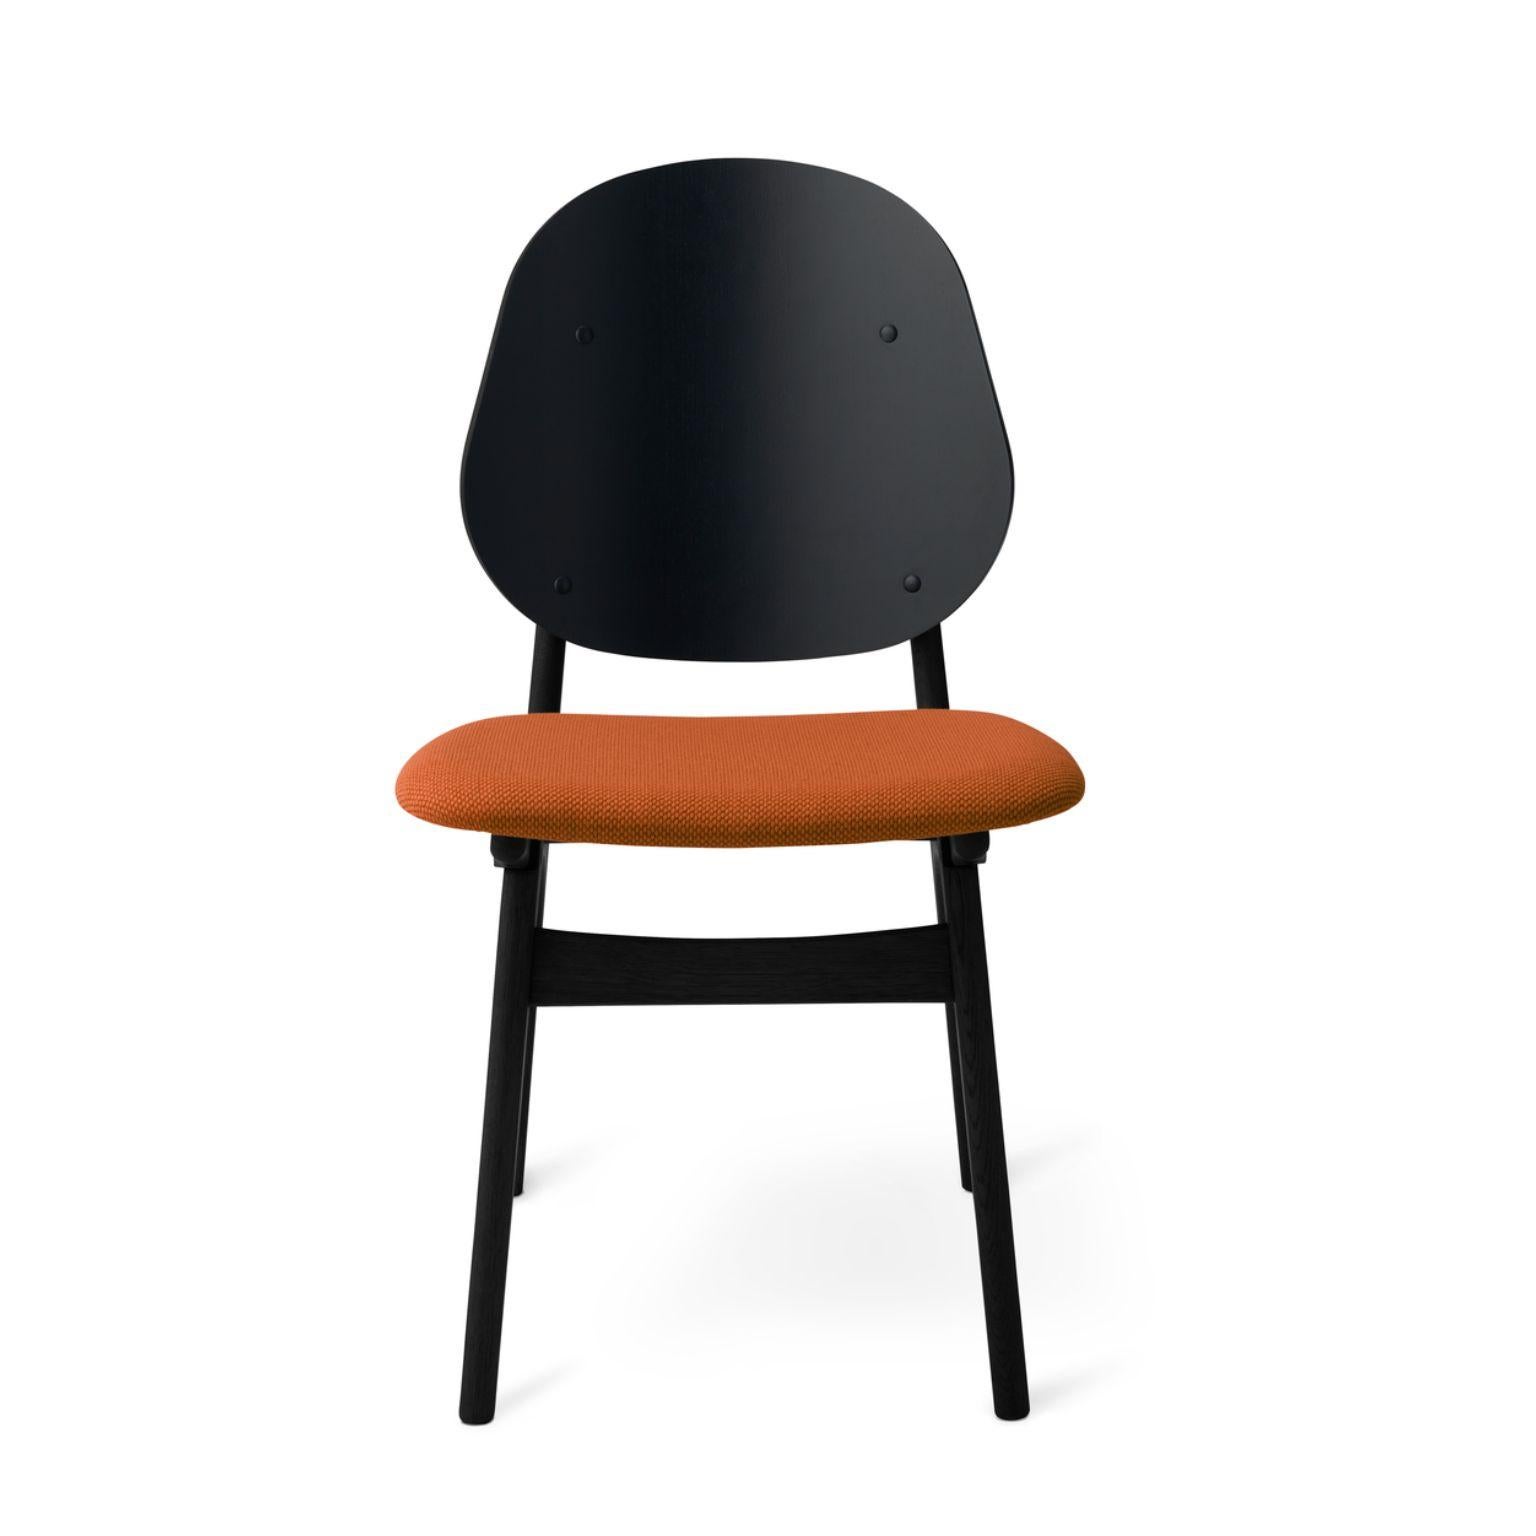 Noble chair black lacquered beech terracotta by Warm Nordic
Dimensions: D55 x W47 x H 85 cm
Material: Black lacquered solid beech, Veneer seat and back, Textile upholstery.
Weight: 7.5 kg
Also available in different colours and finishes.

An